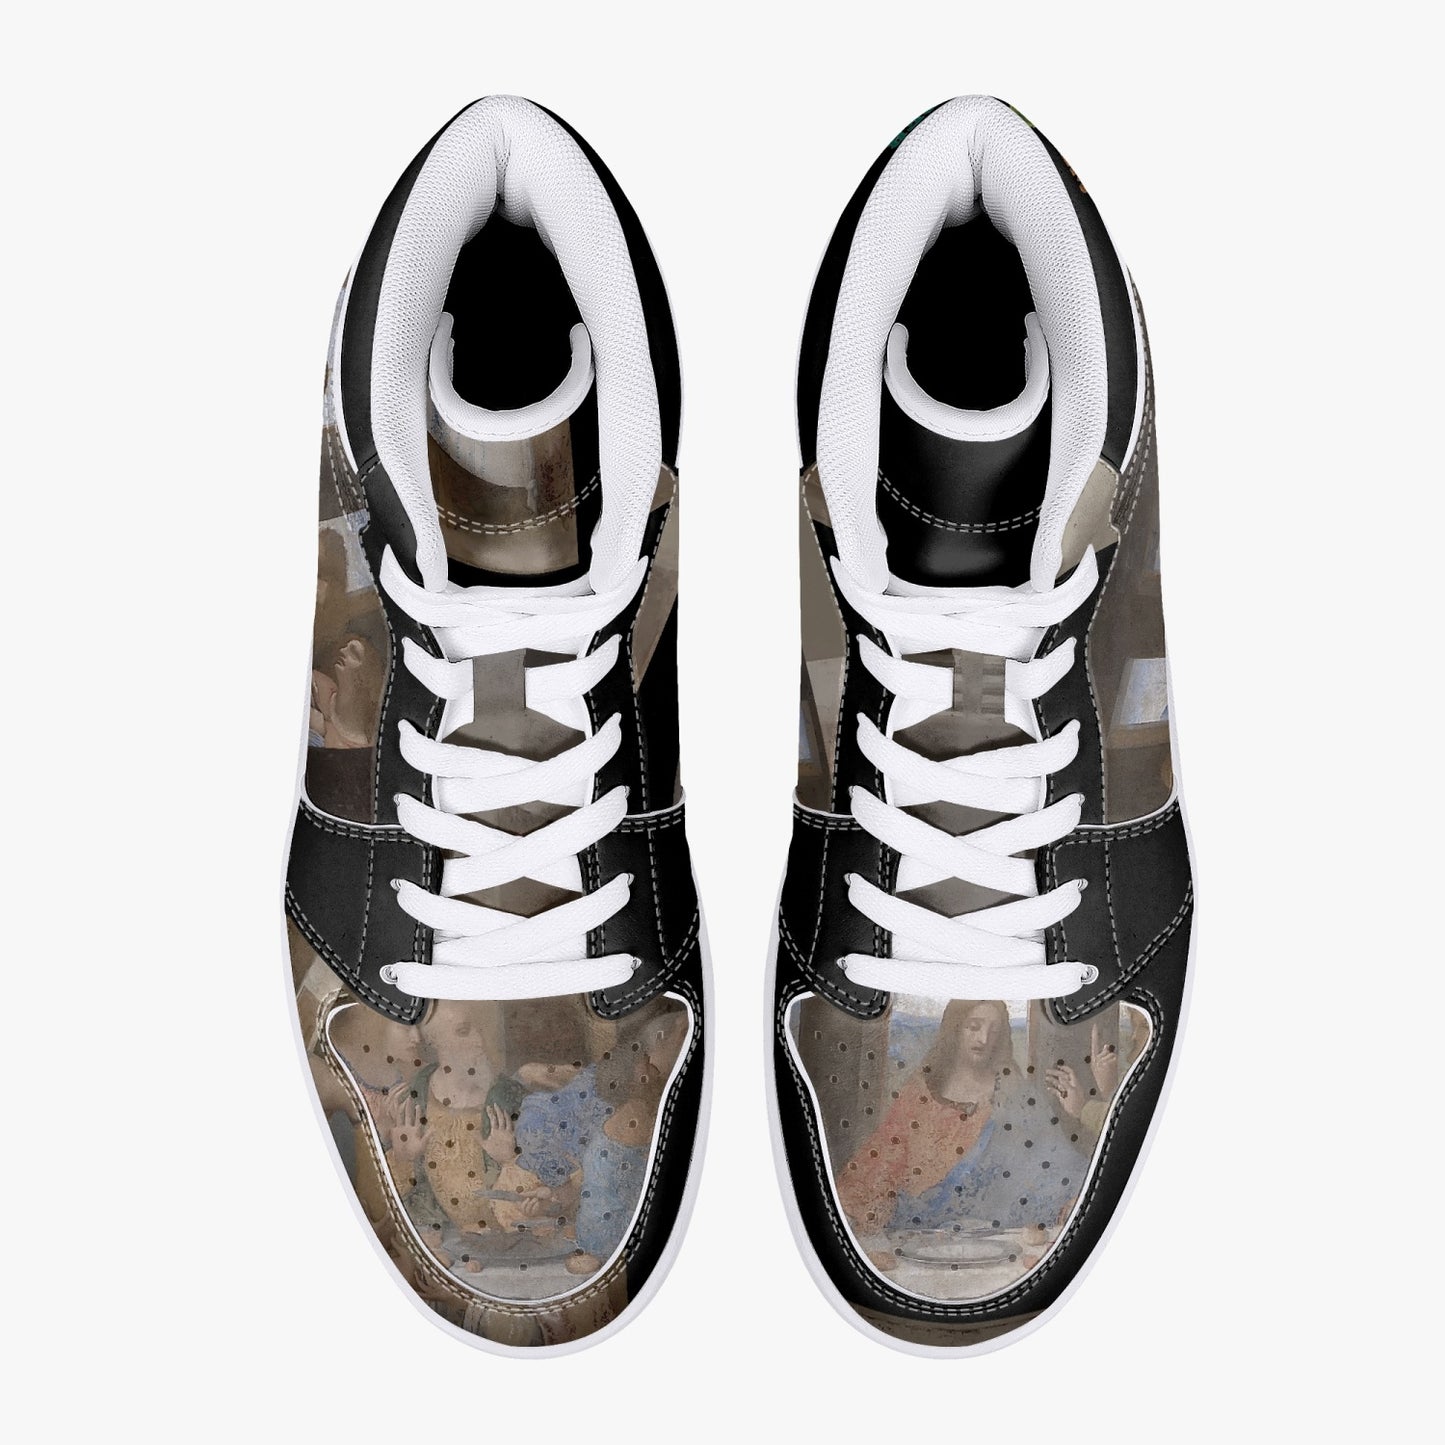 209. Custom Designed The Last Supper High-Top Leather Sneakers - White / Black